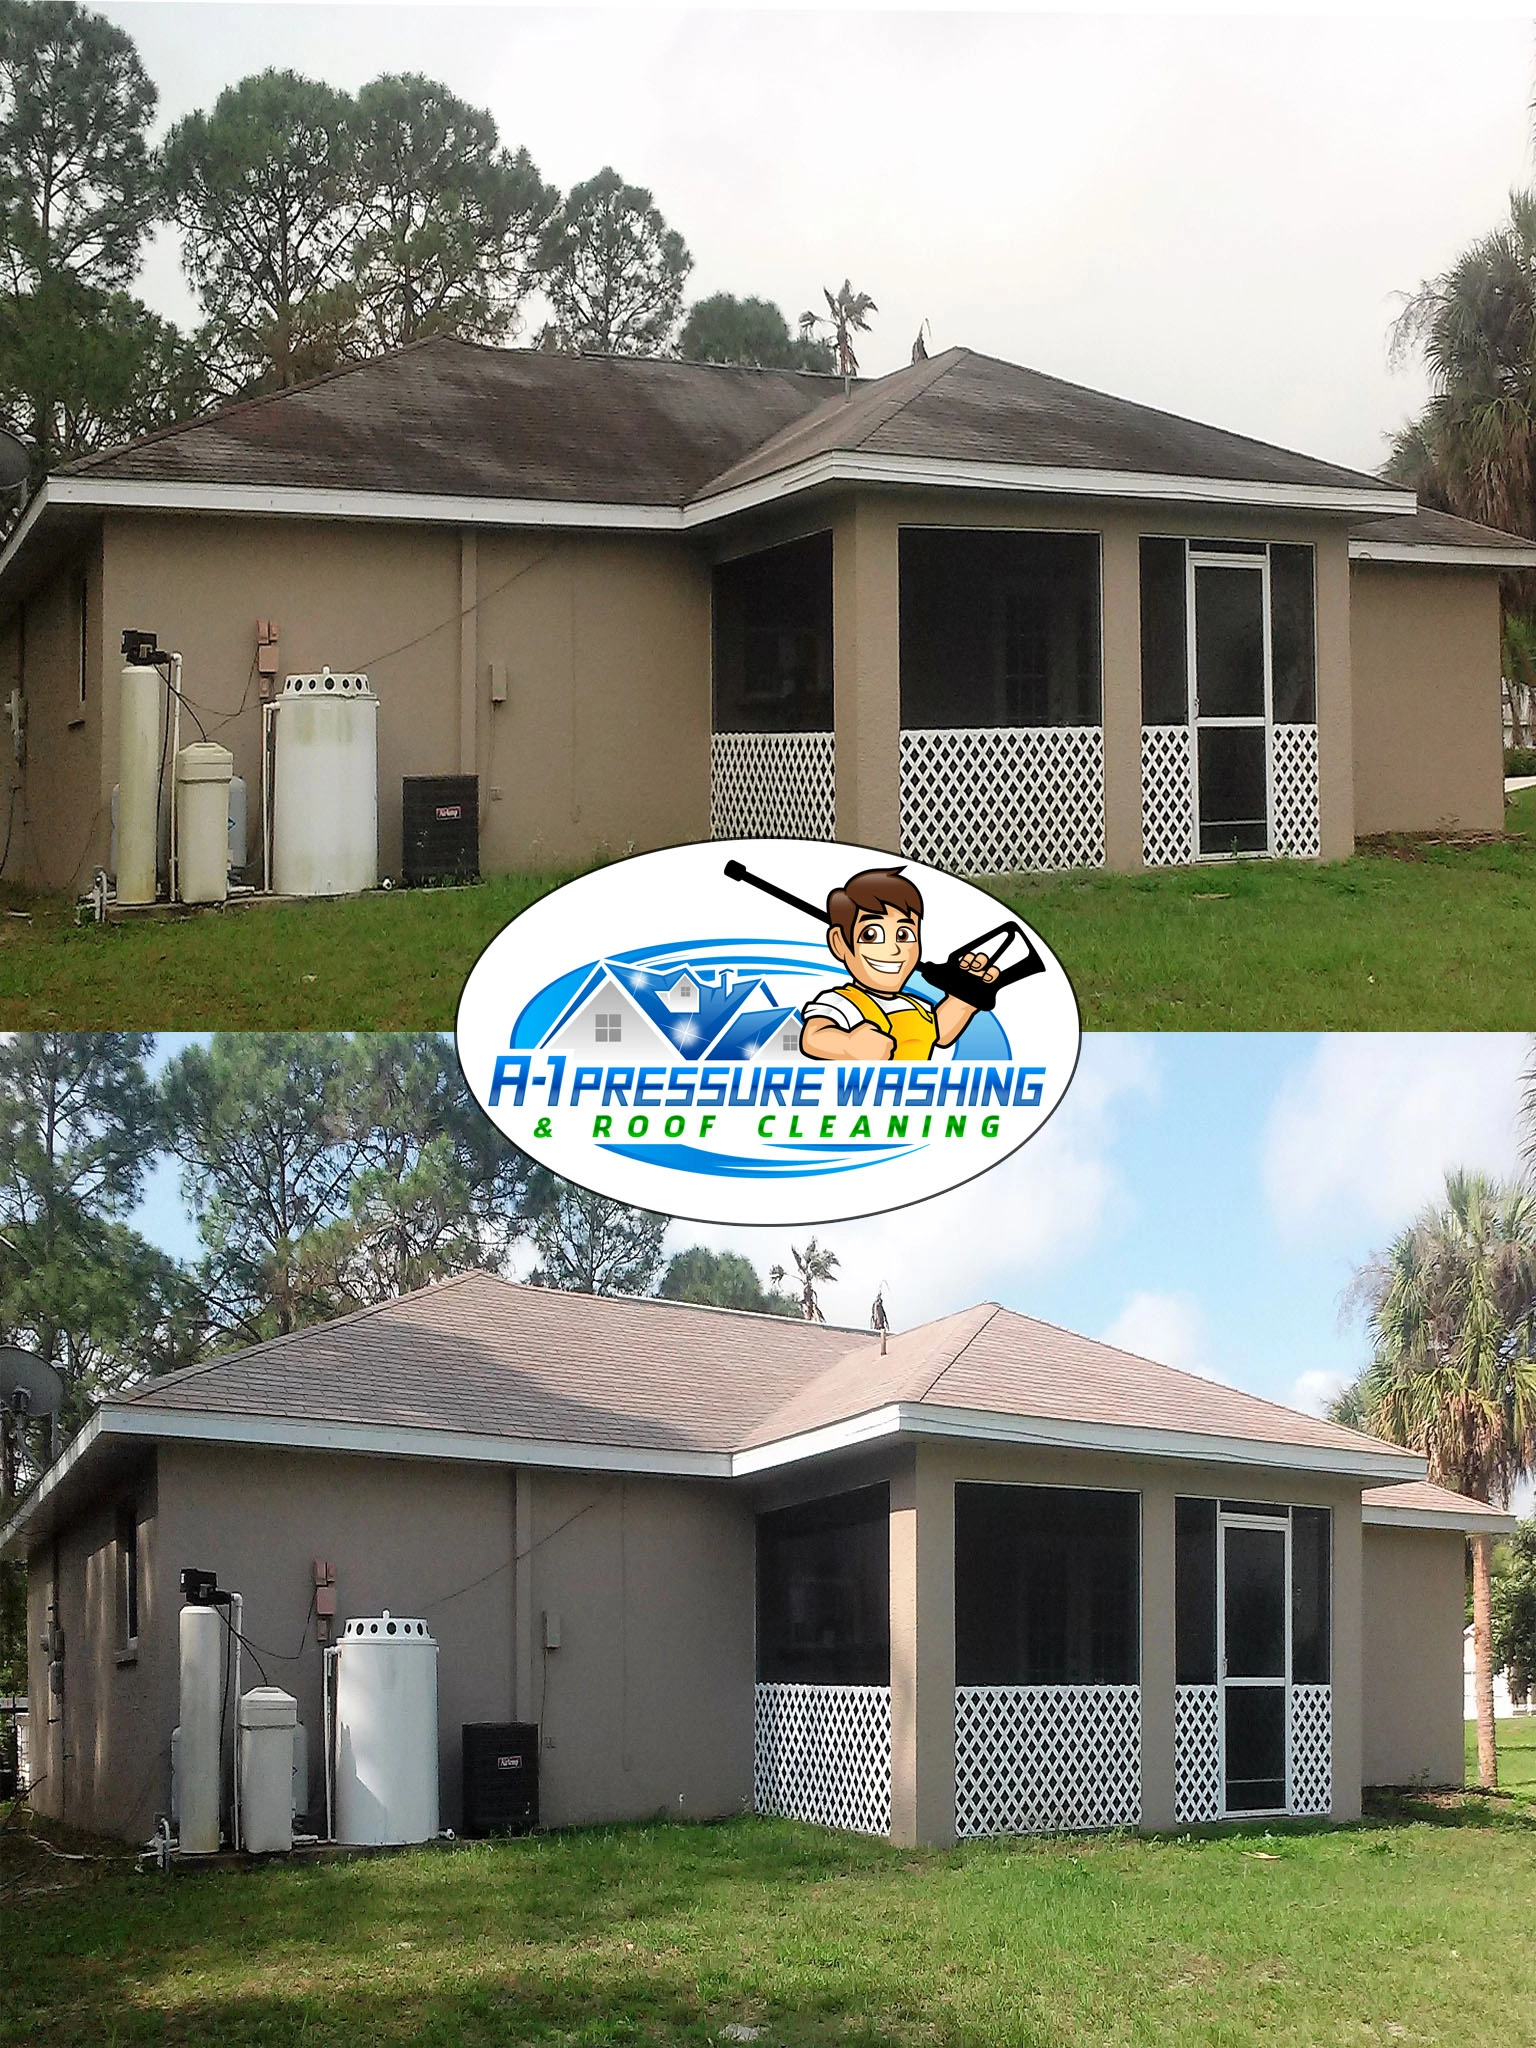 Shingle Roof Cleaning | A-1 Pressure Washing & Roof Cleaning | 941-815-8454 